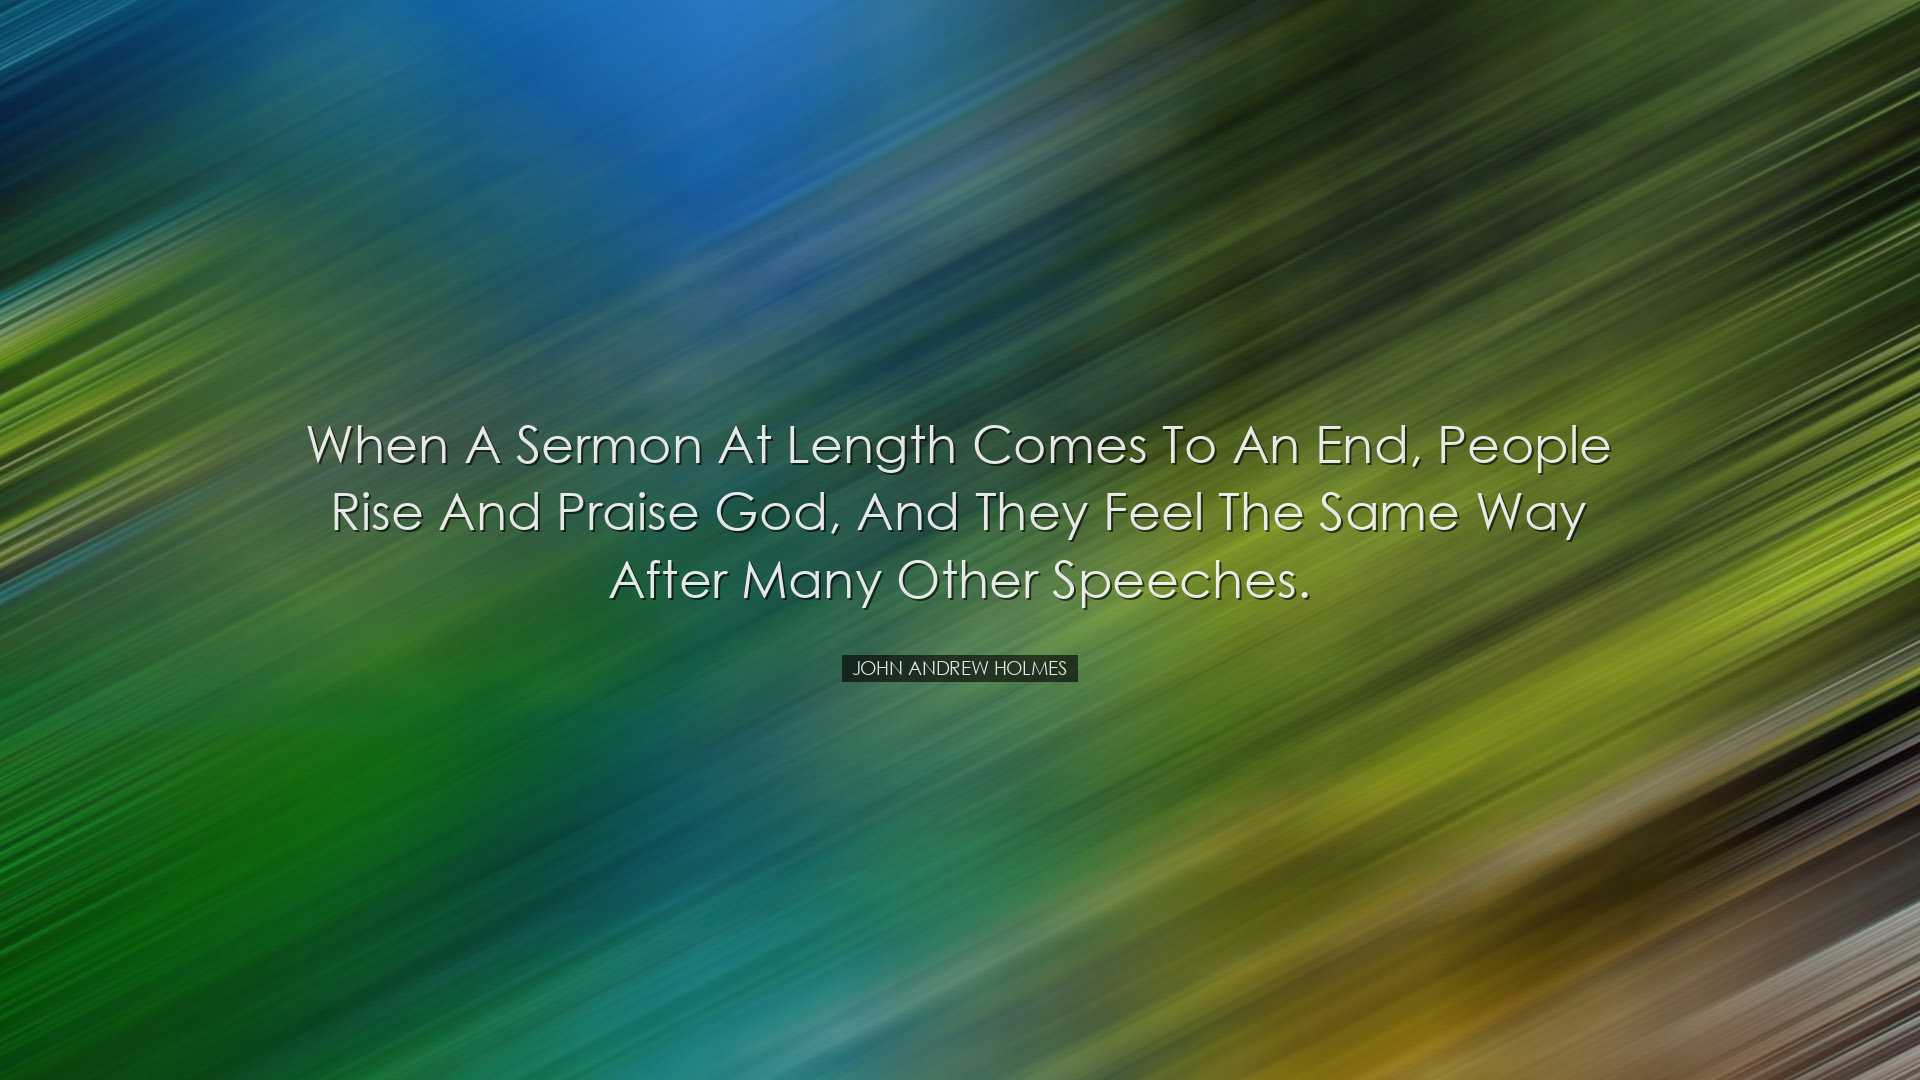 When a sermon at length comes to an end, people rise and praise Go